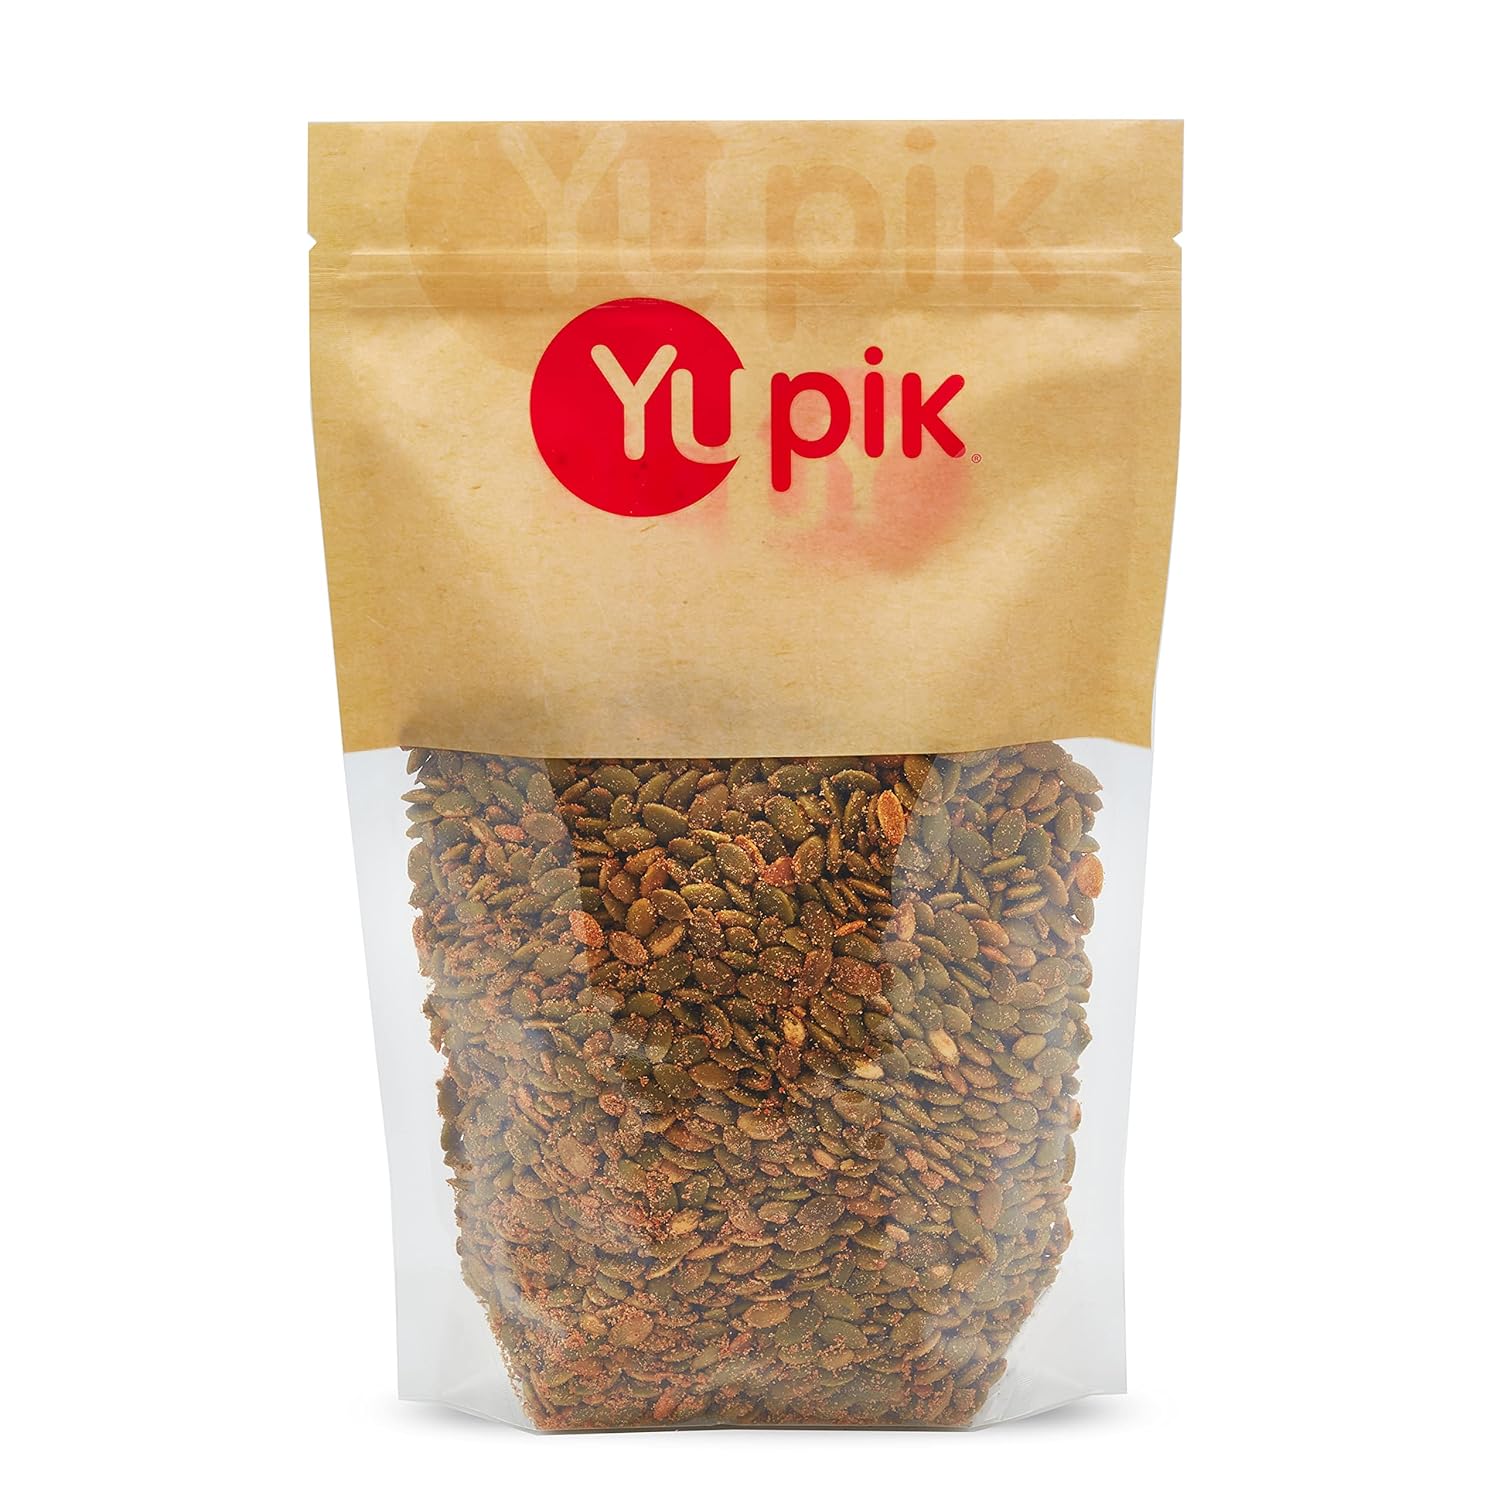 Yupik Spicy Buffalo Pumpkin Seeds, 2.2 lbs, Seasoned & Roasted Seeds, Crunchy Snack or Salad Topper, Vegan, Non GMO, No Preservatives or Artificial Flavors, Brown, Pack of 1